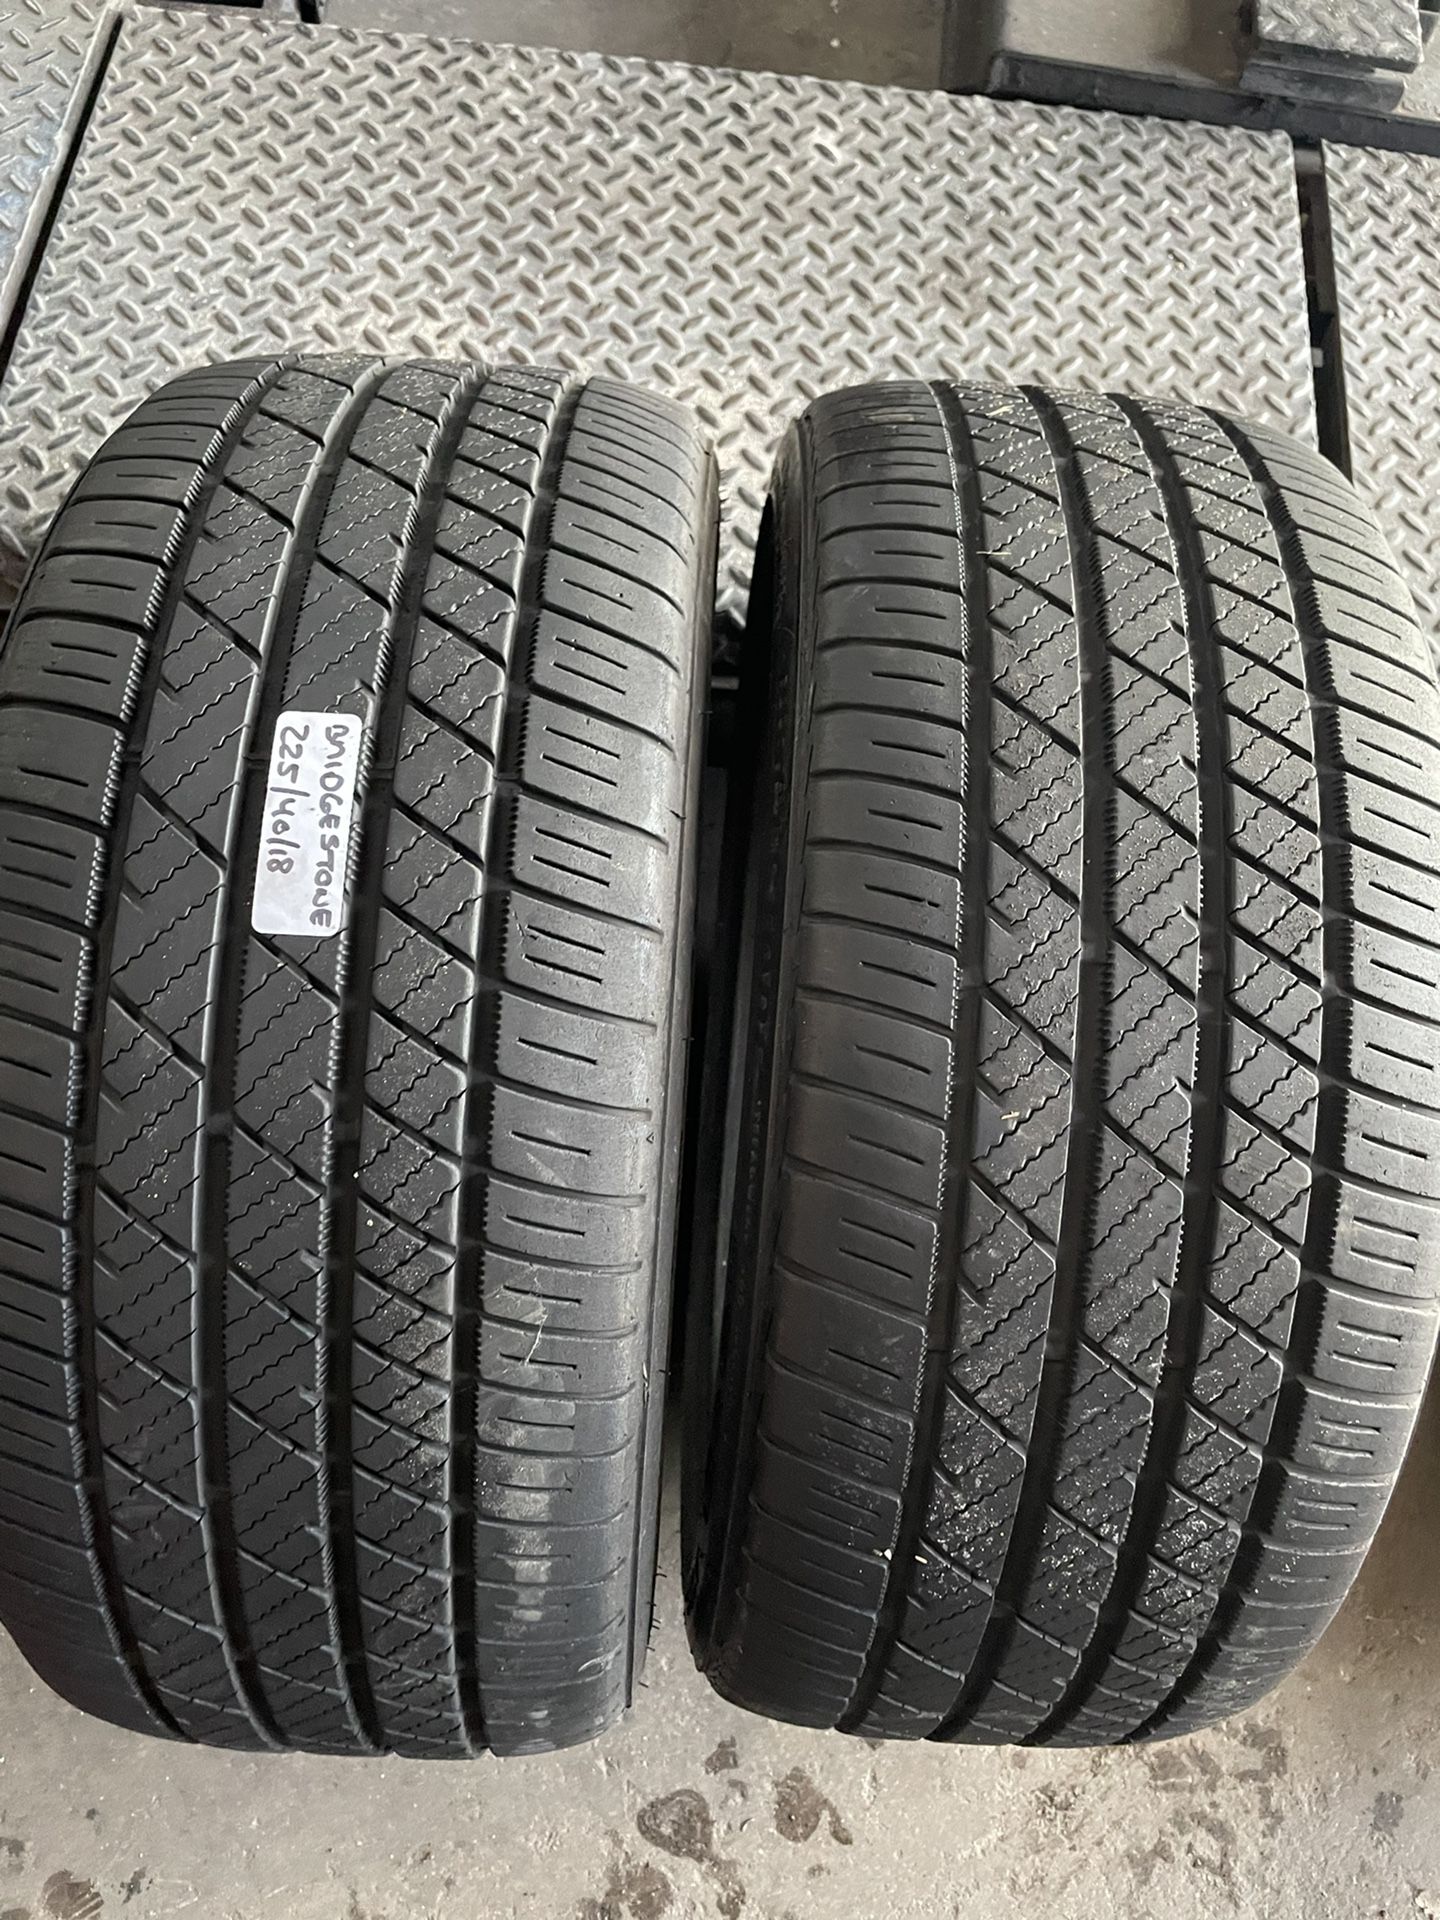 2 Used 22540R18 Bridgestone Potenza Run flat Tires For $120 for The Pair Picked Up Or $150 Installed And Balanced .  Texas Extreme Tire Co 1305 Presto